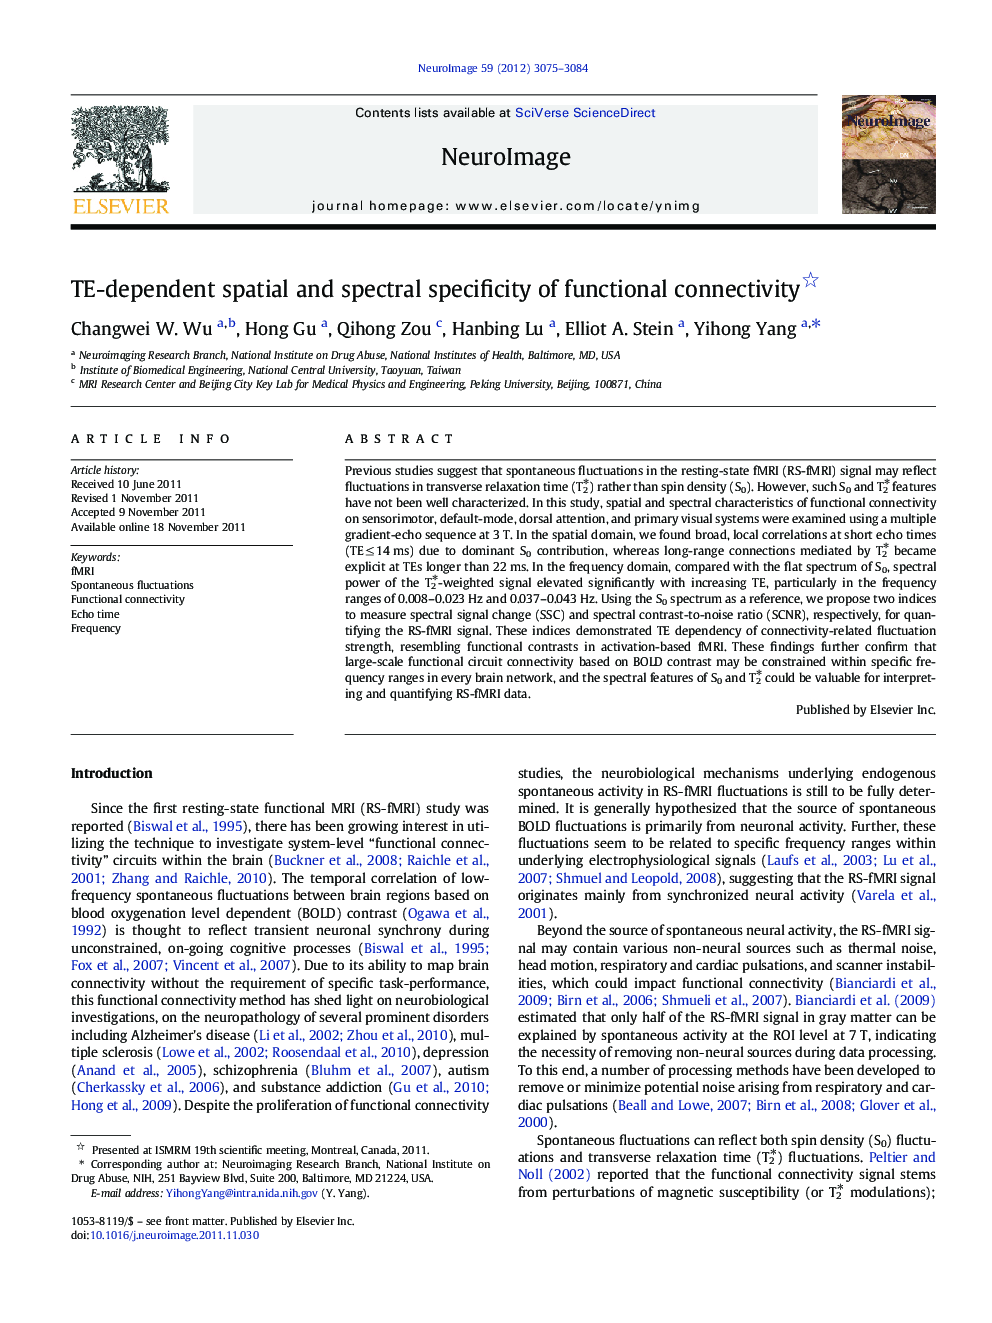 TE-dependent spatial and spectral specificity of functional connectivity